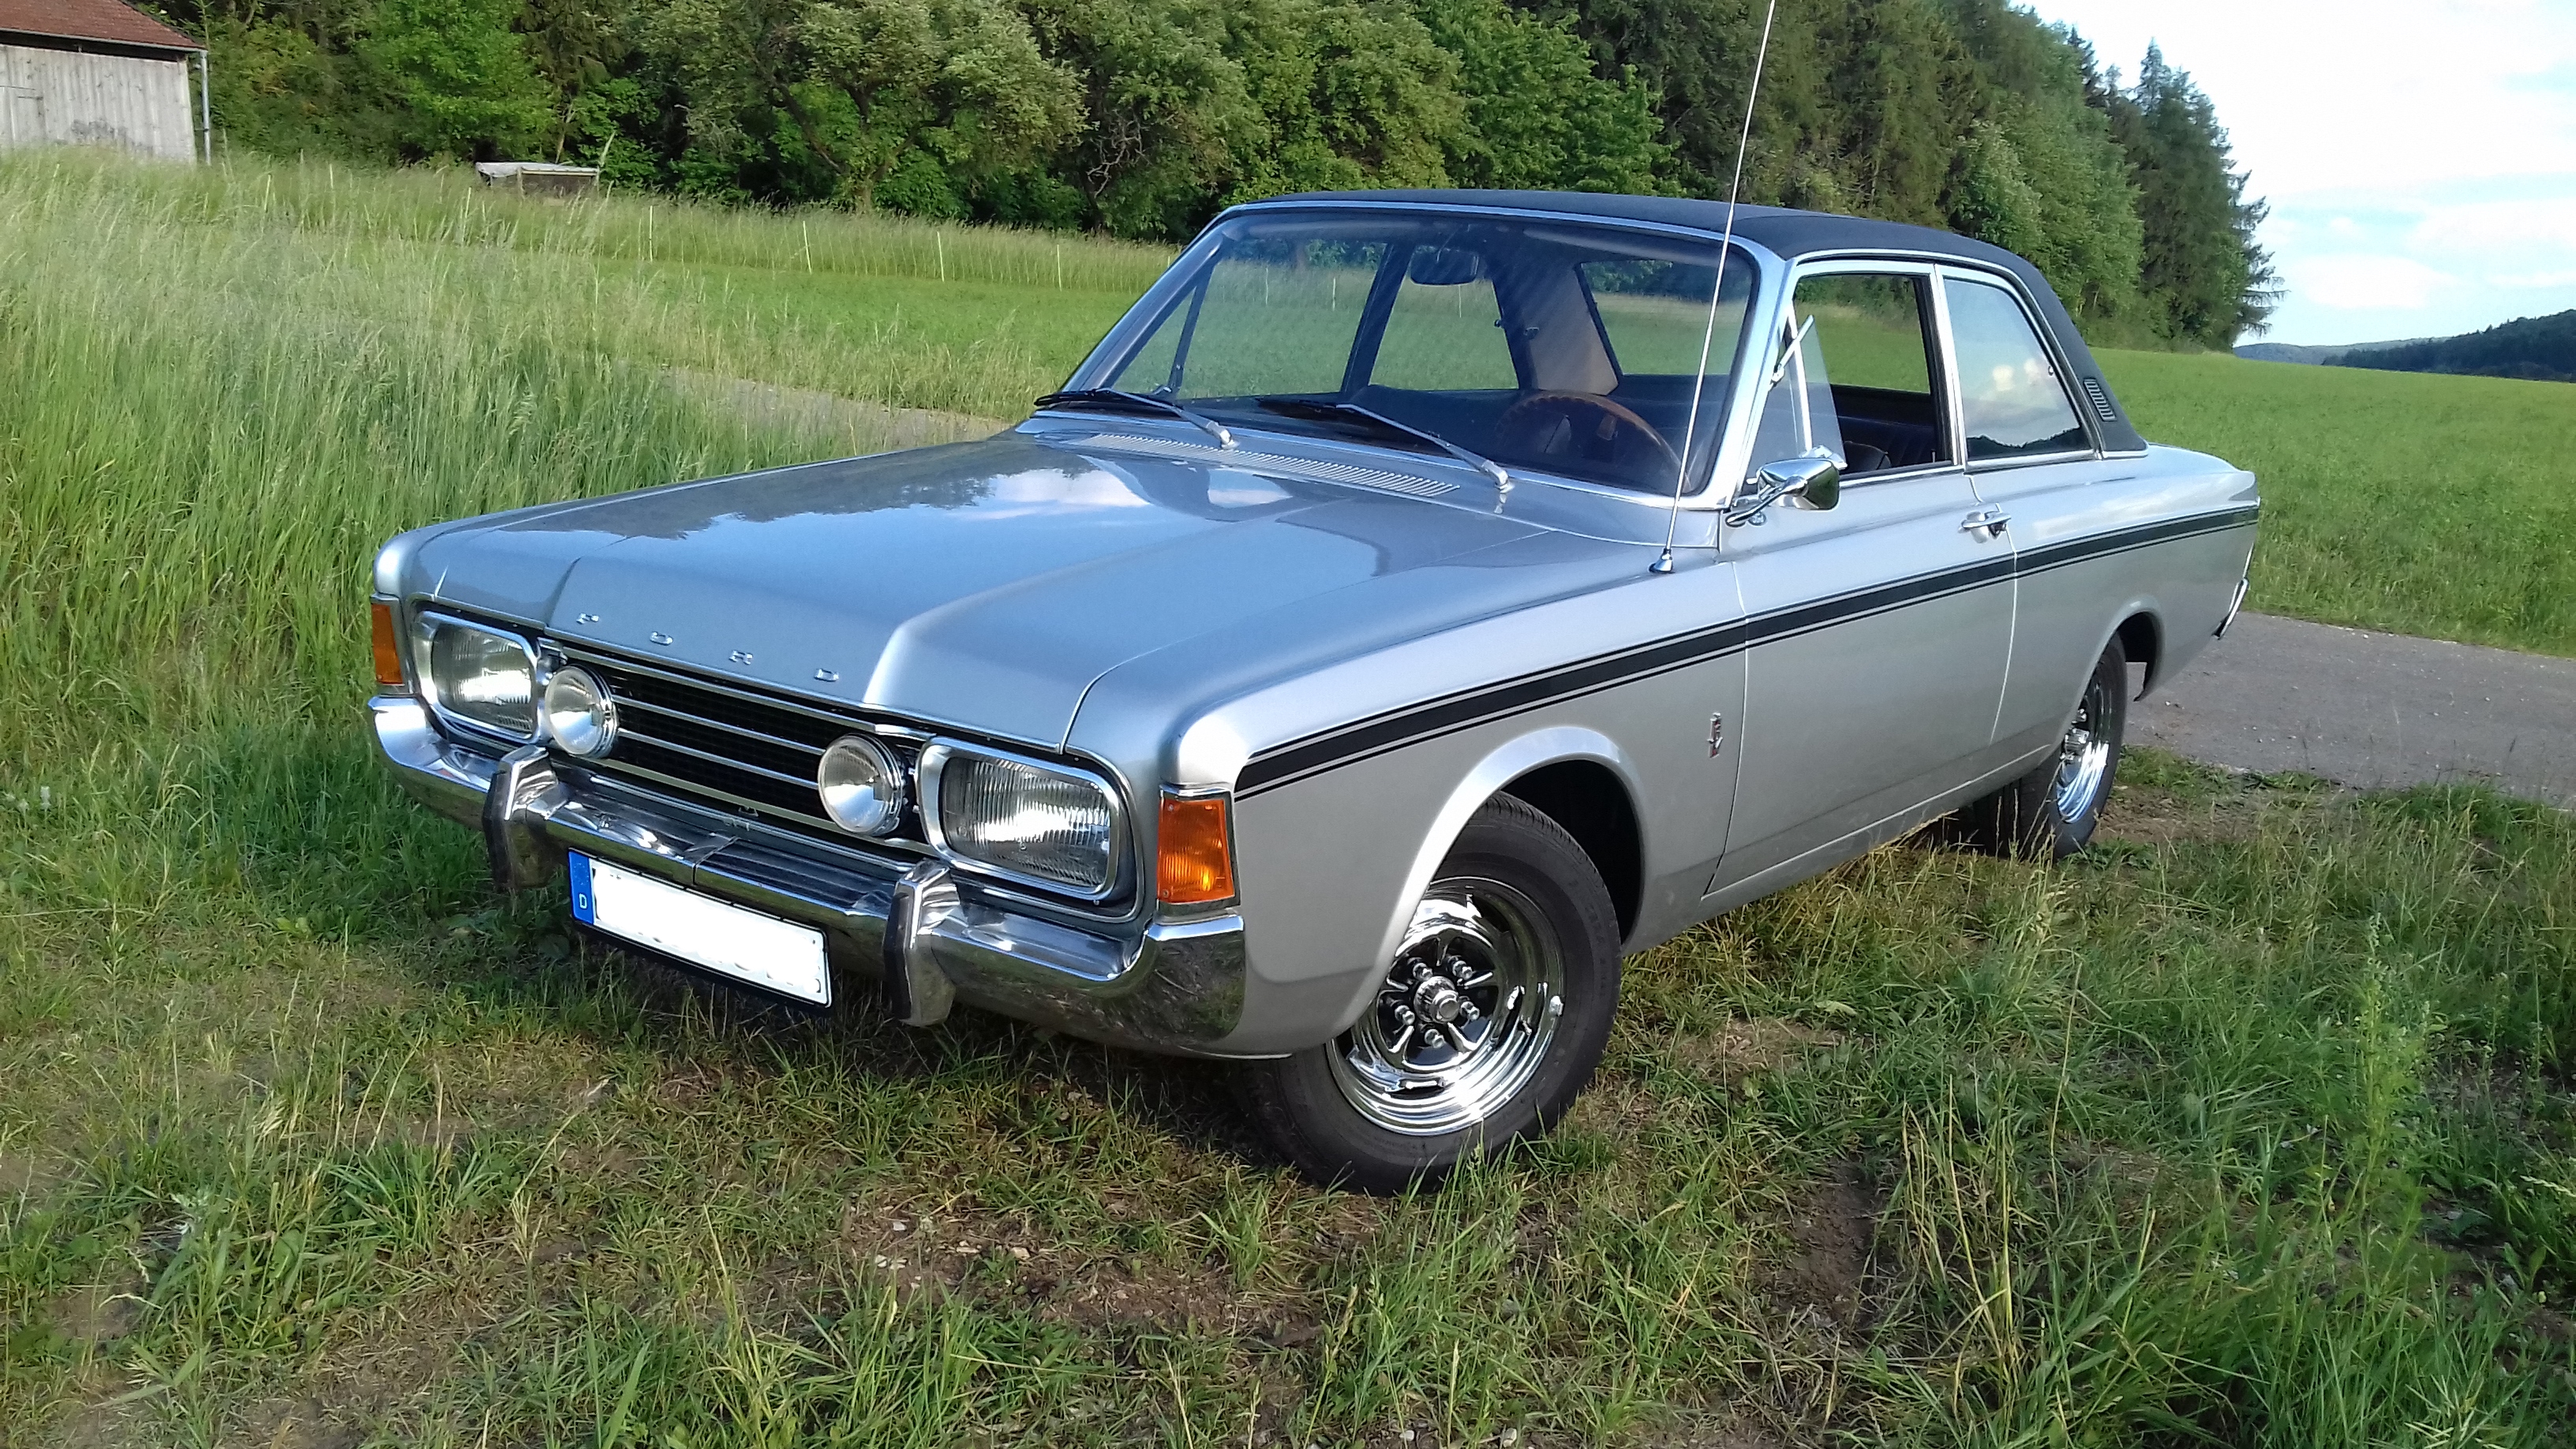 Ford Taunus 20M RS coupe specs, photos, videos and more on TopWorldAuto